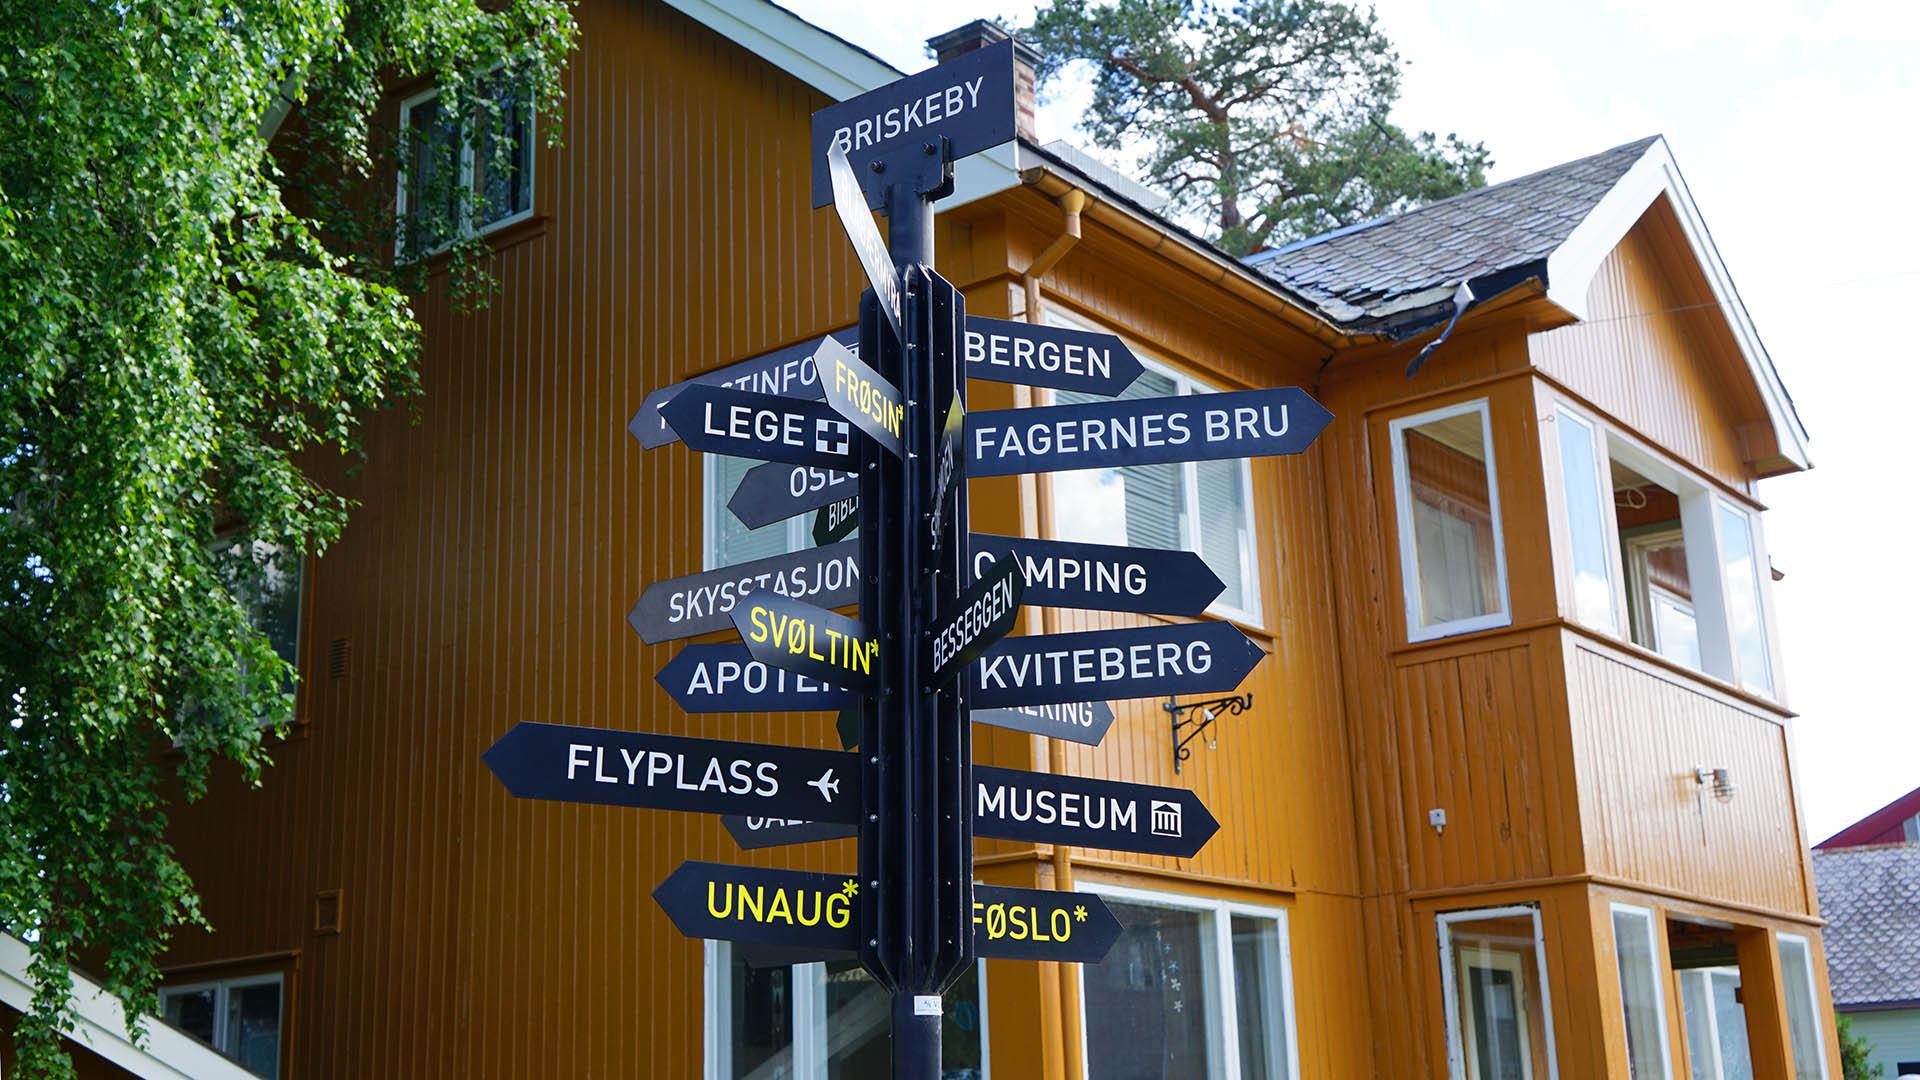 A signpost in front of a yellow-orange wooden building in the old part of the small town Fagernes